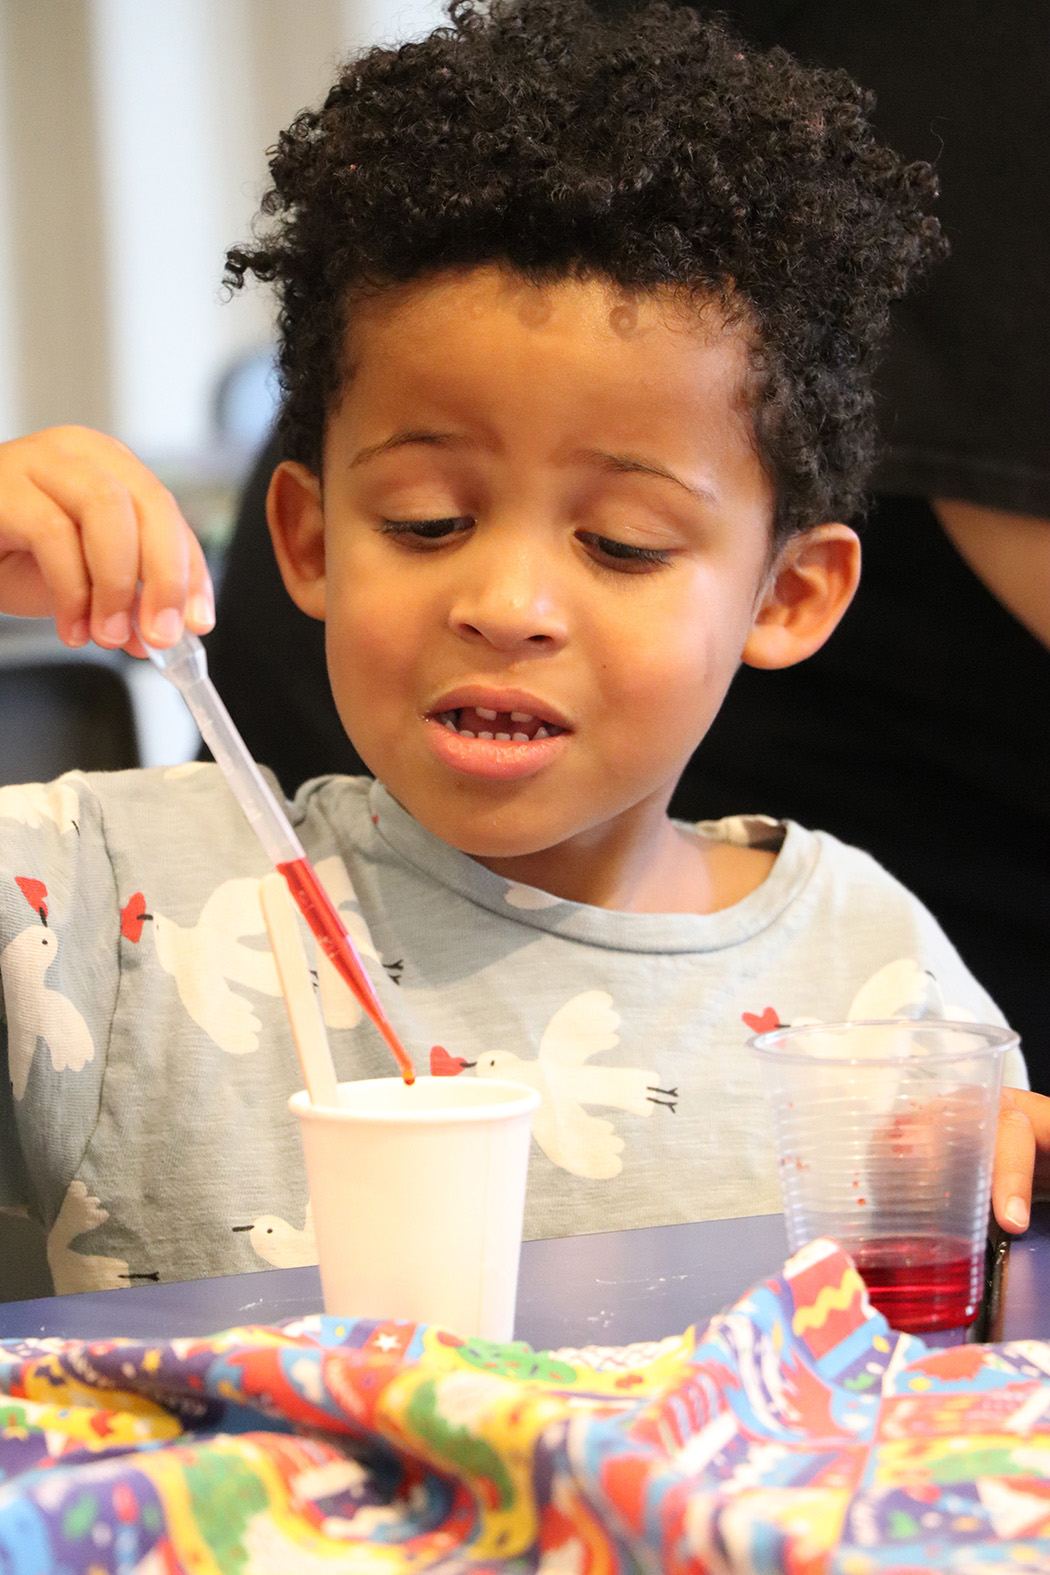 A young boy performs a chemistry experiment during a WonderLab birthday party.